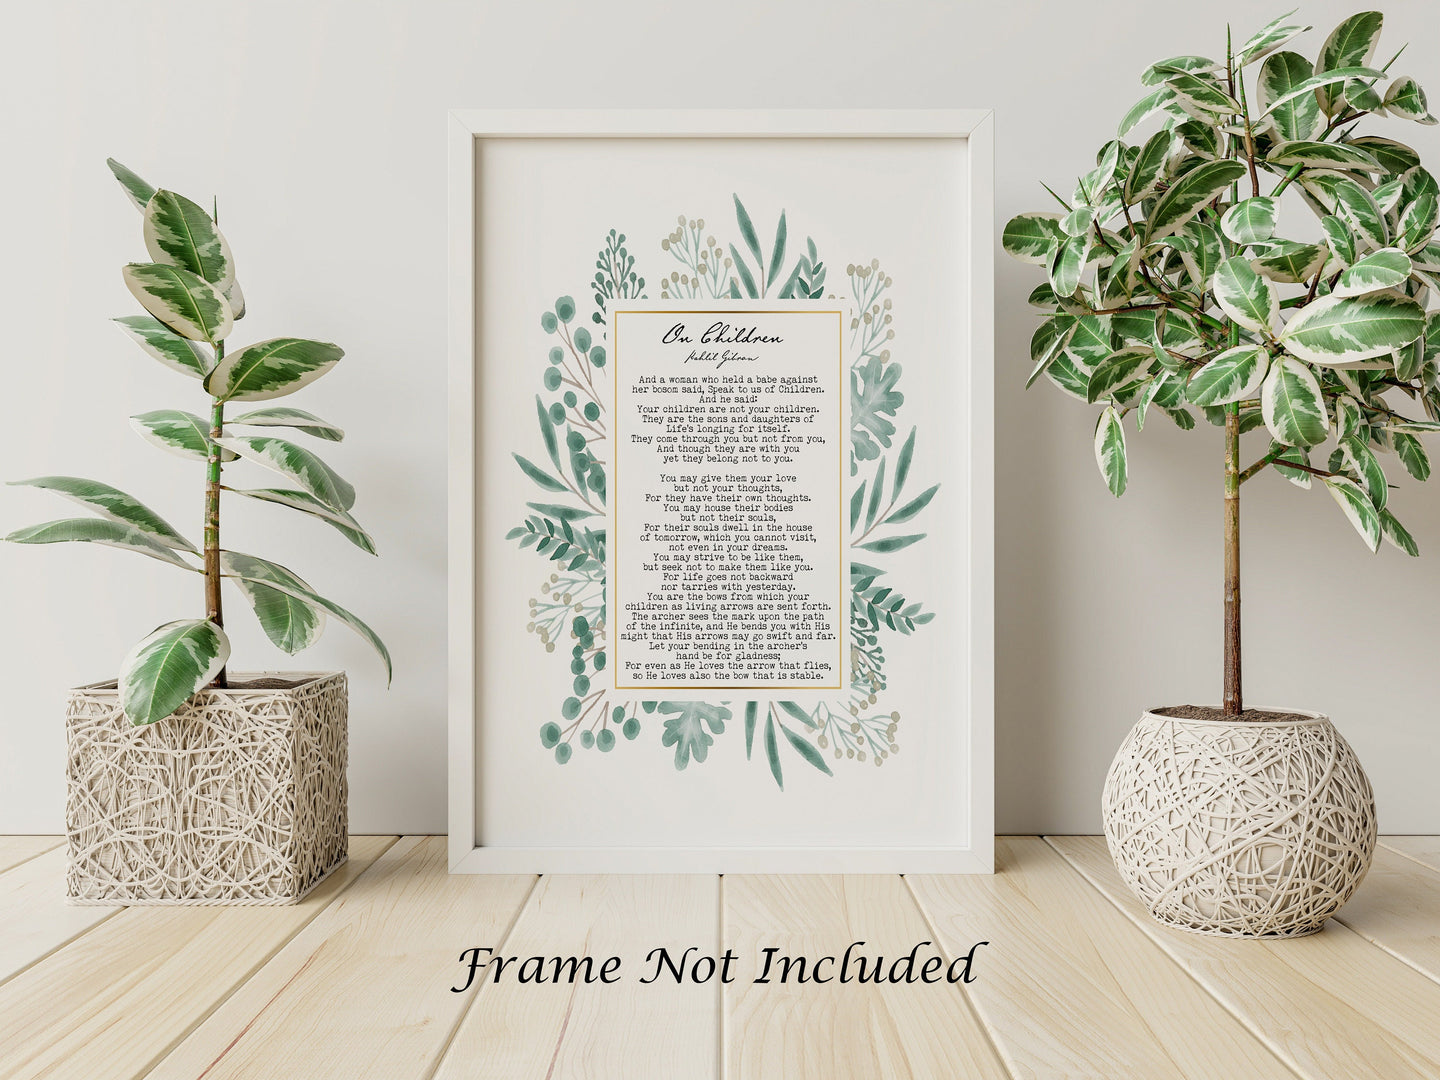 On Children Kahlil Gibran Poem - Poetry Poster Print - Literary Wall Art - Physical Print Without Frame